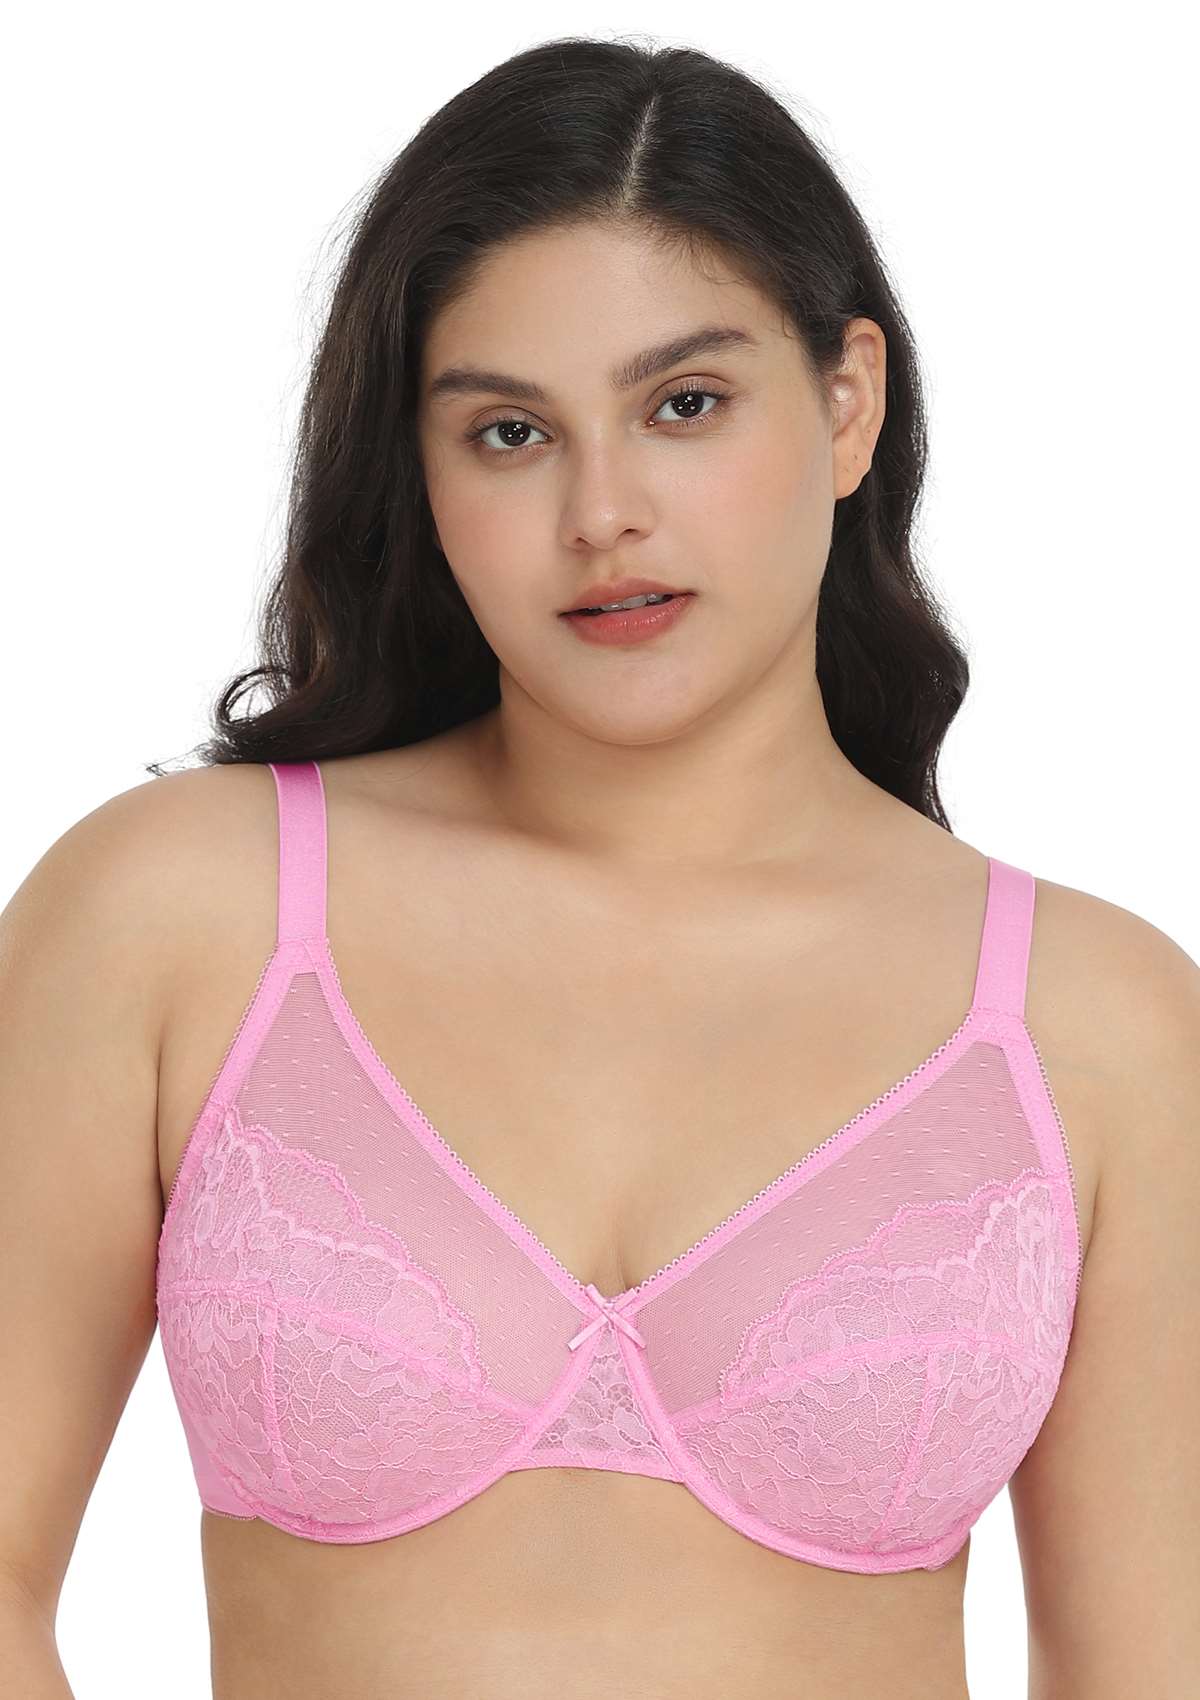 HSIA Enchante Lacy Bra: Comfy Sheer Lace Bra With Lift - Dusty Peach / 46 / C